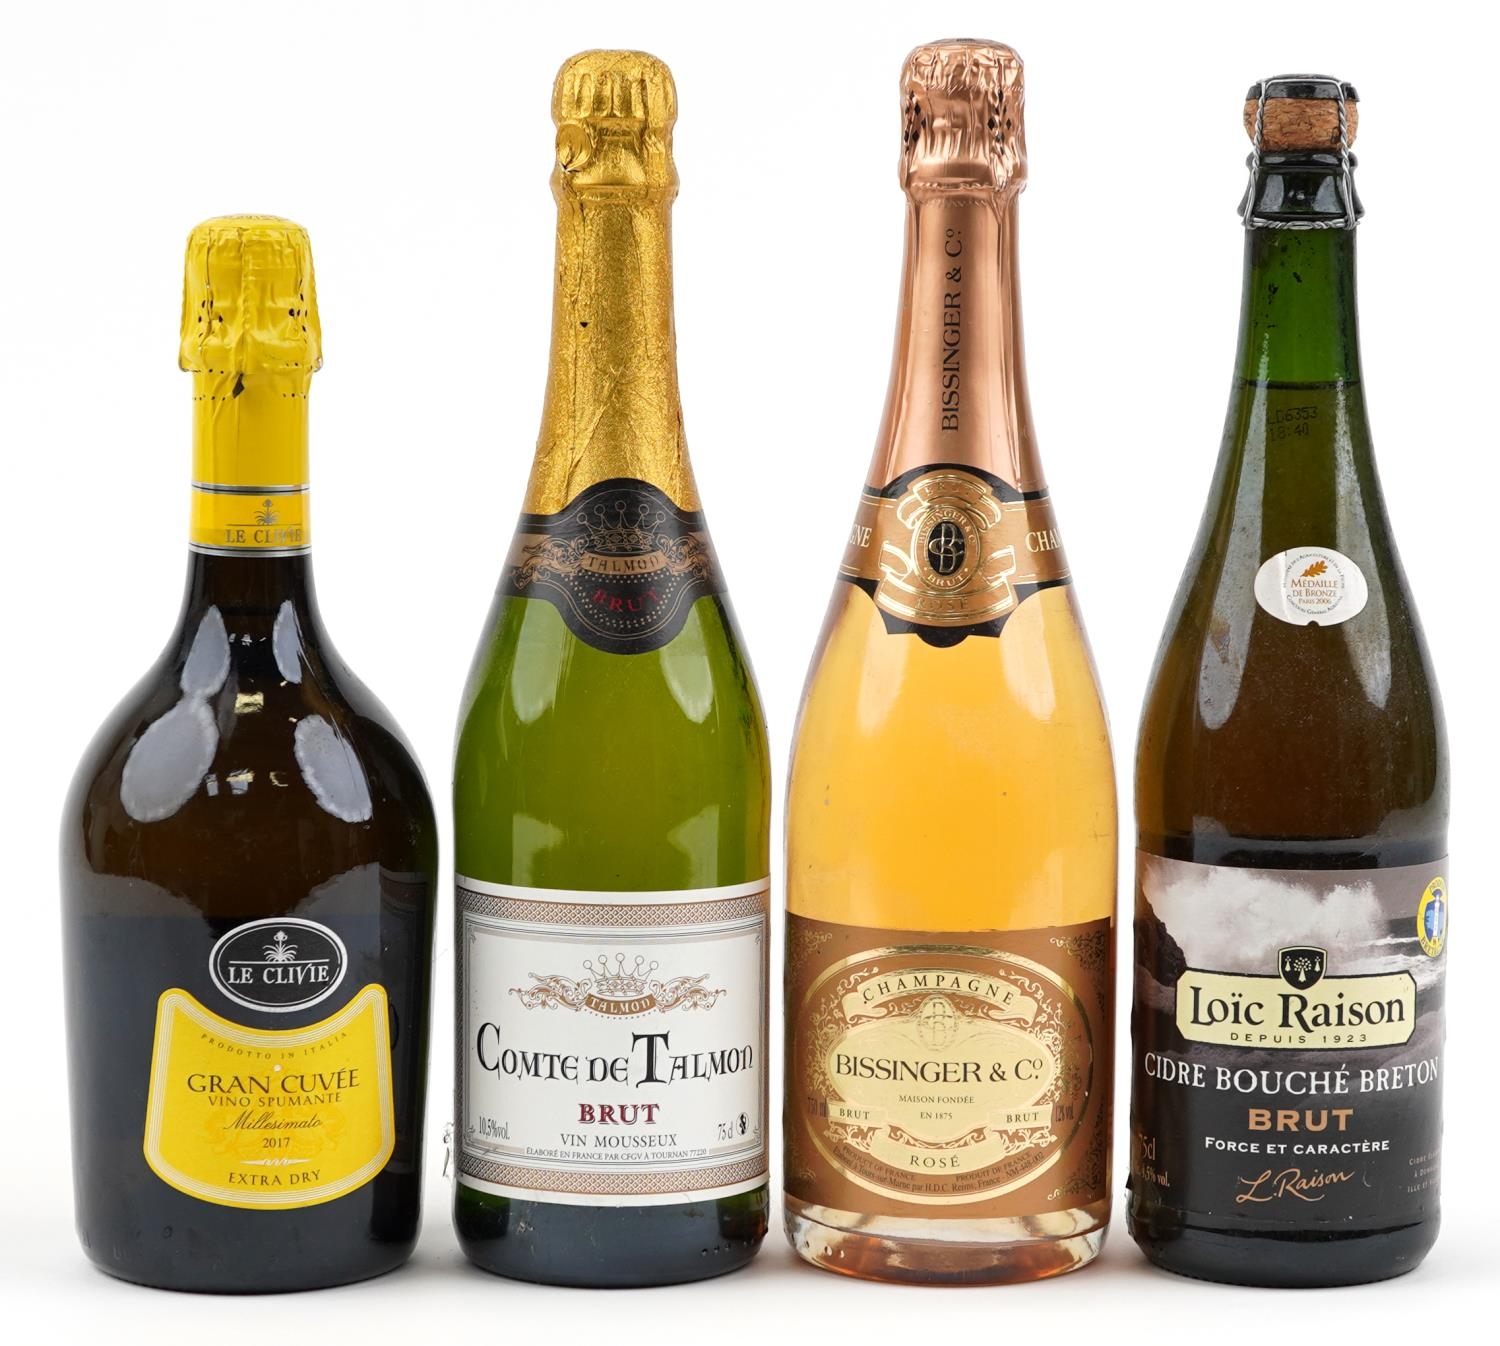 including bottles of & Talmon Rose Co Four alcohol Champagne de Comte and Bissinger